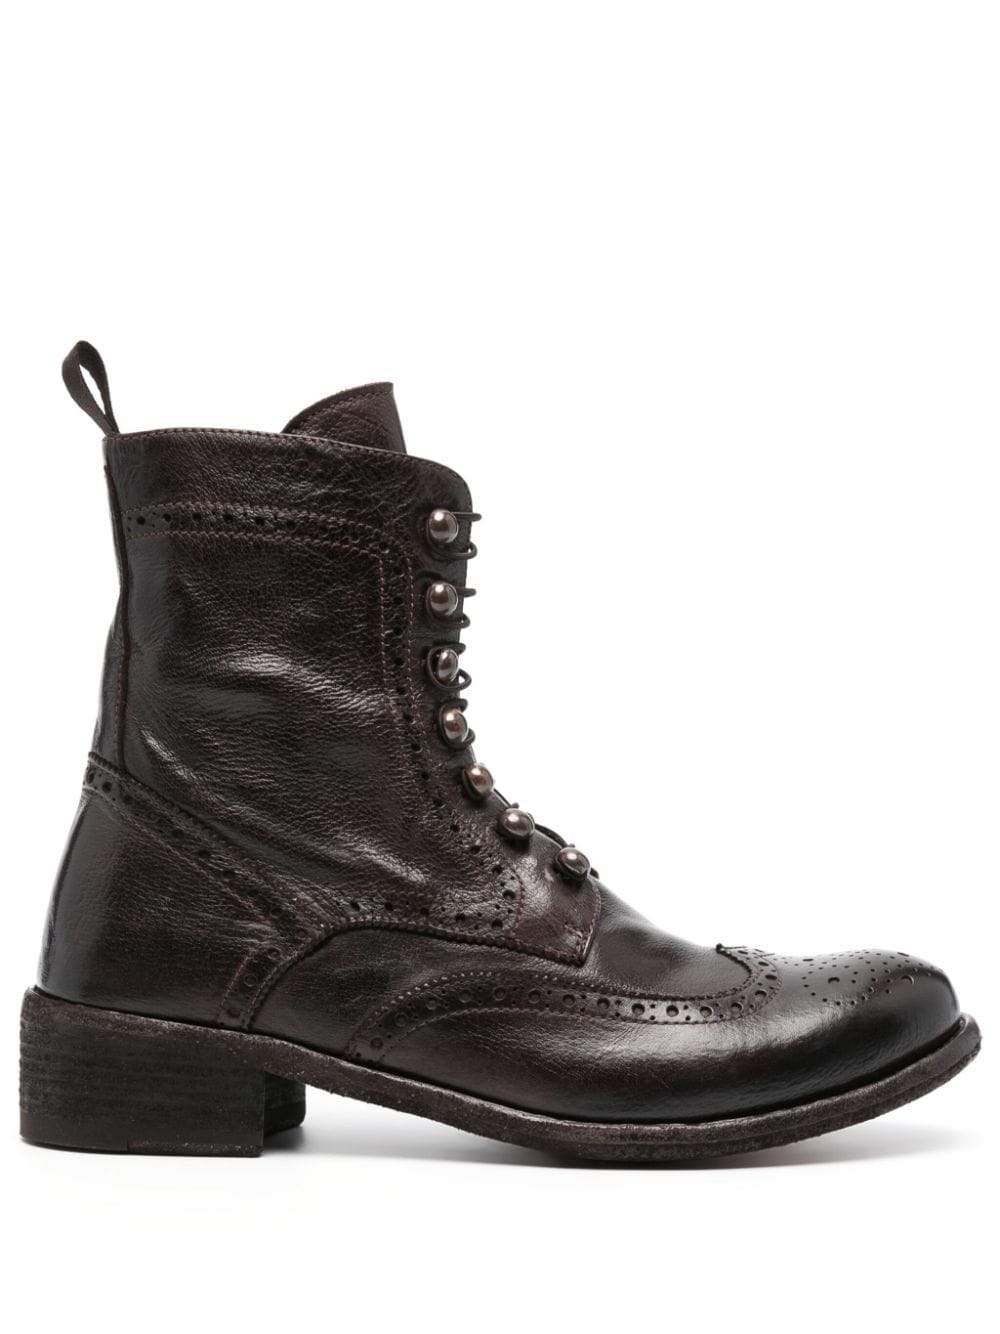 Officine Creative Lison 058 40mm lace-up leather boots - Brown von Officine Creative